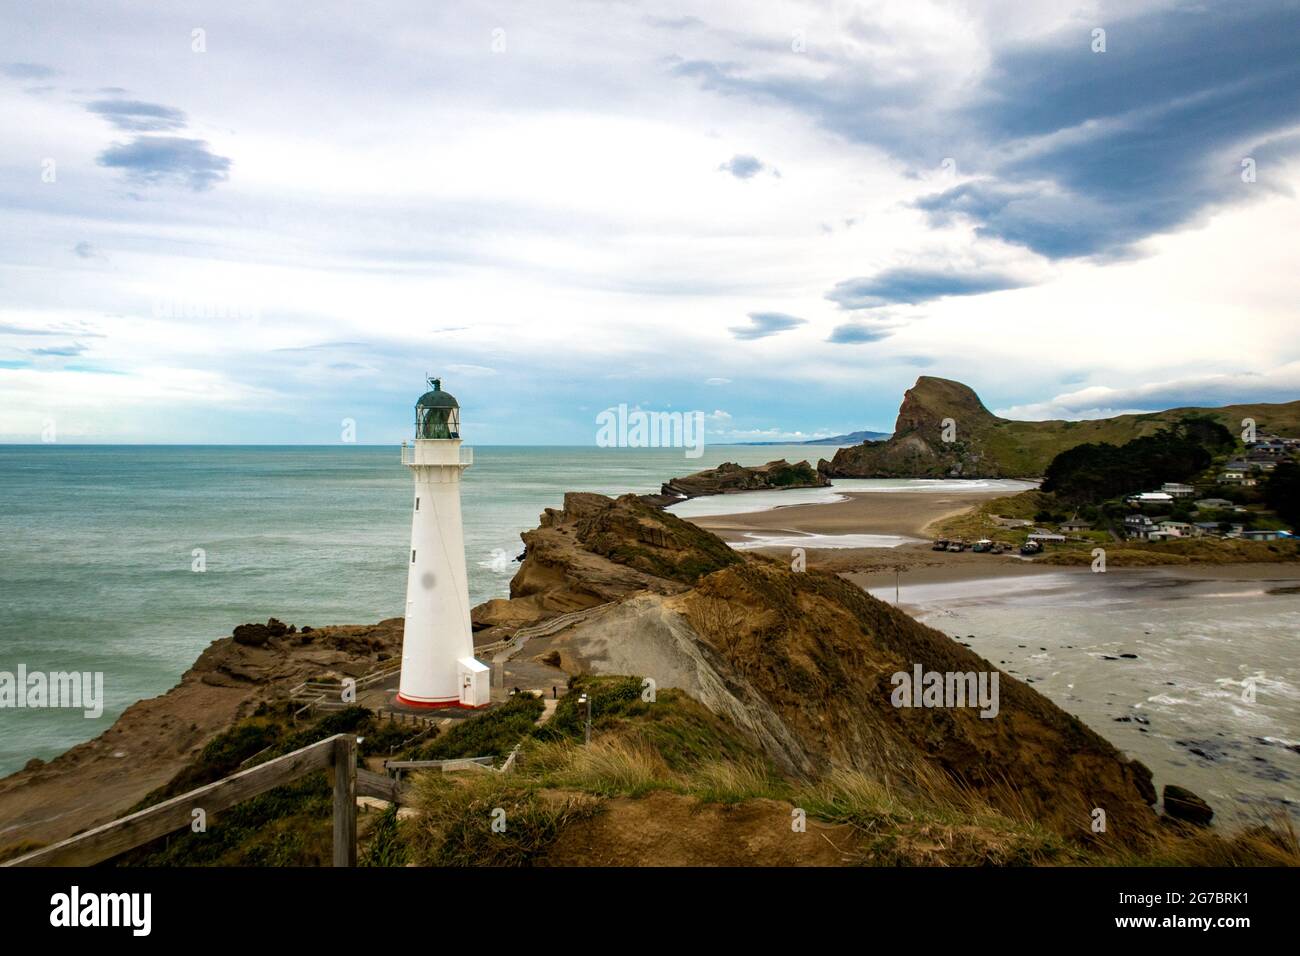 Castlepoint Lighthouse sits high on the cliff overlooking the ocean to guide ships away from the rocks, Wairarapa, New Zealand Stock Photo